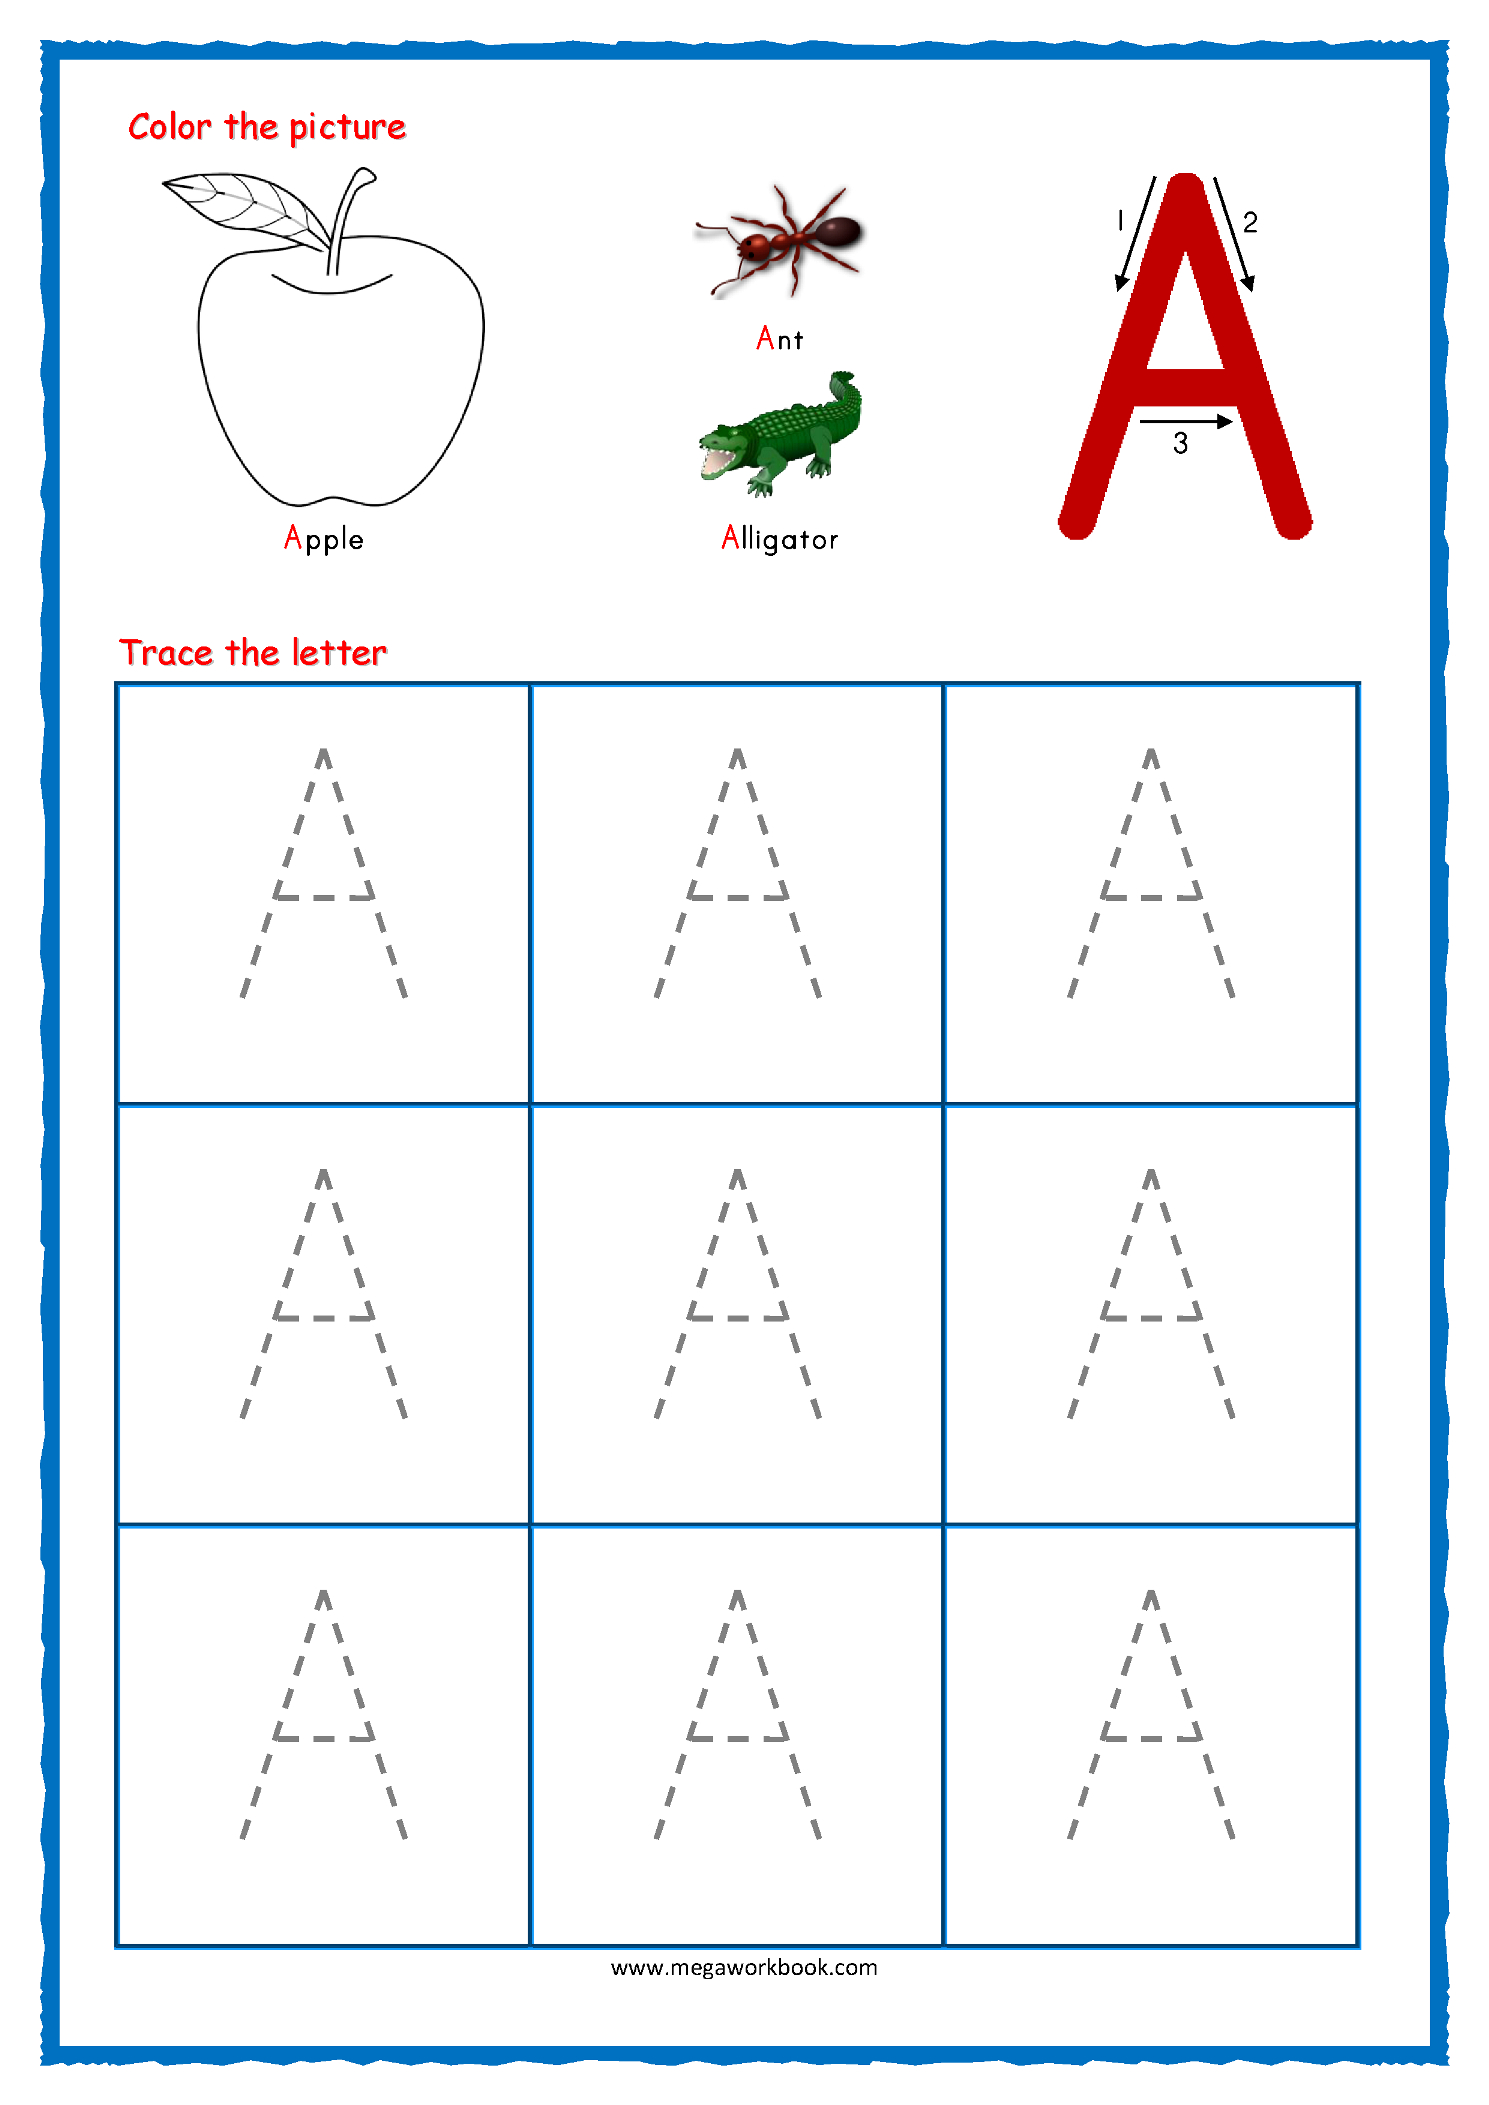 downloadable-tracing-letters-tracinglettersworksheetscom-traceable-alphabets-for-children